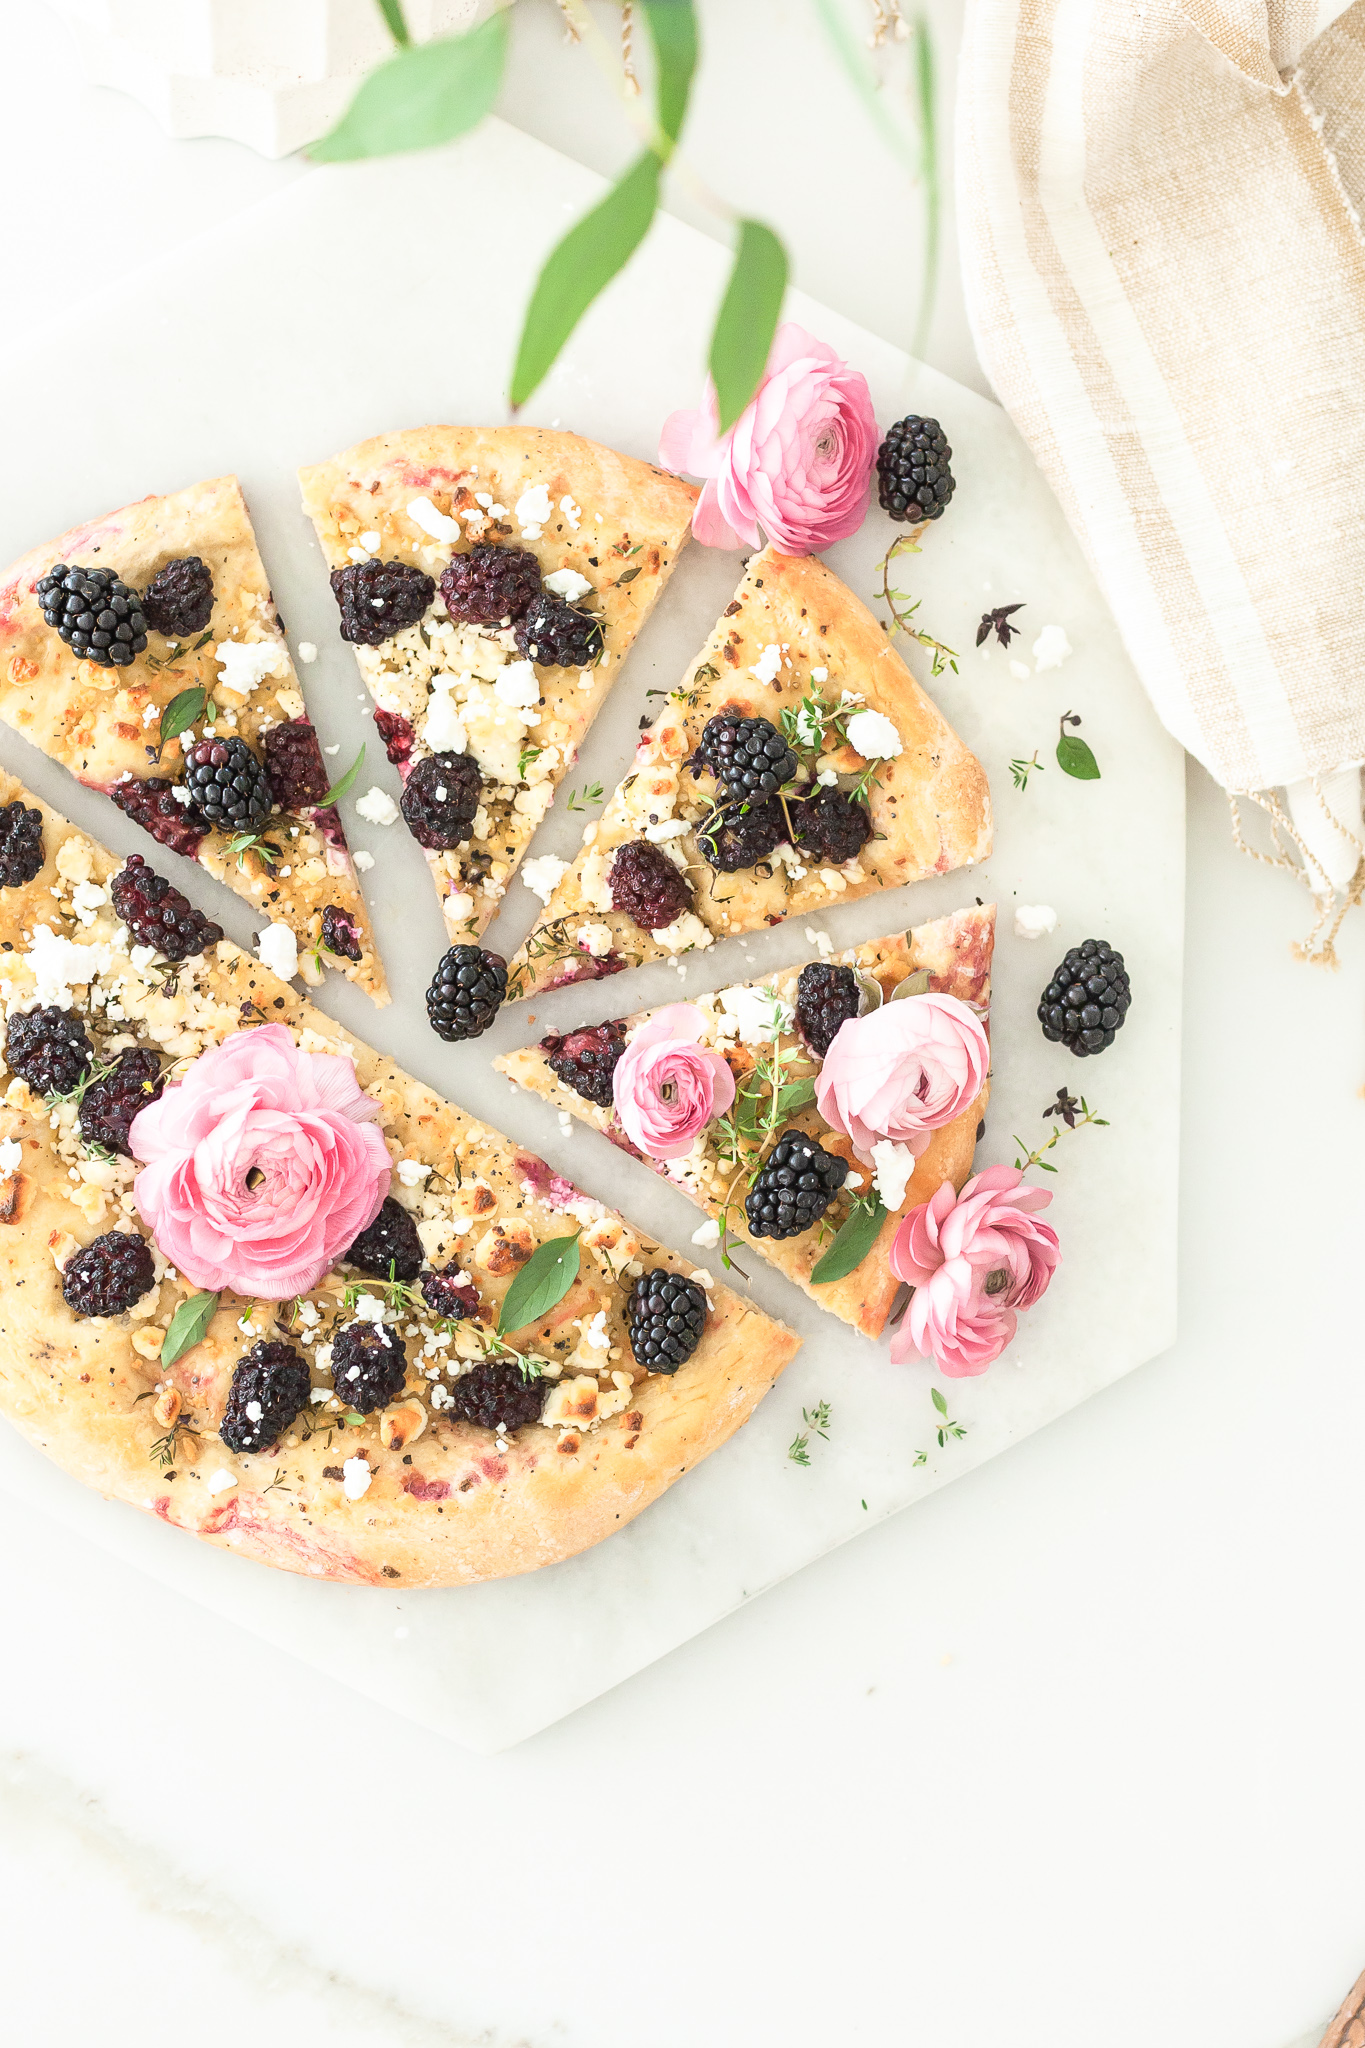 Bring on Summer With This Blackberry Goat Cheese Pizza